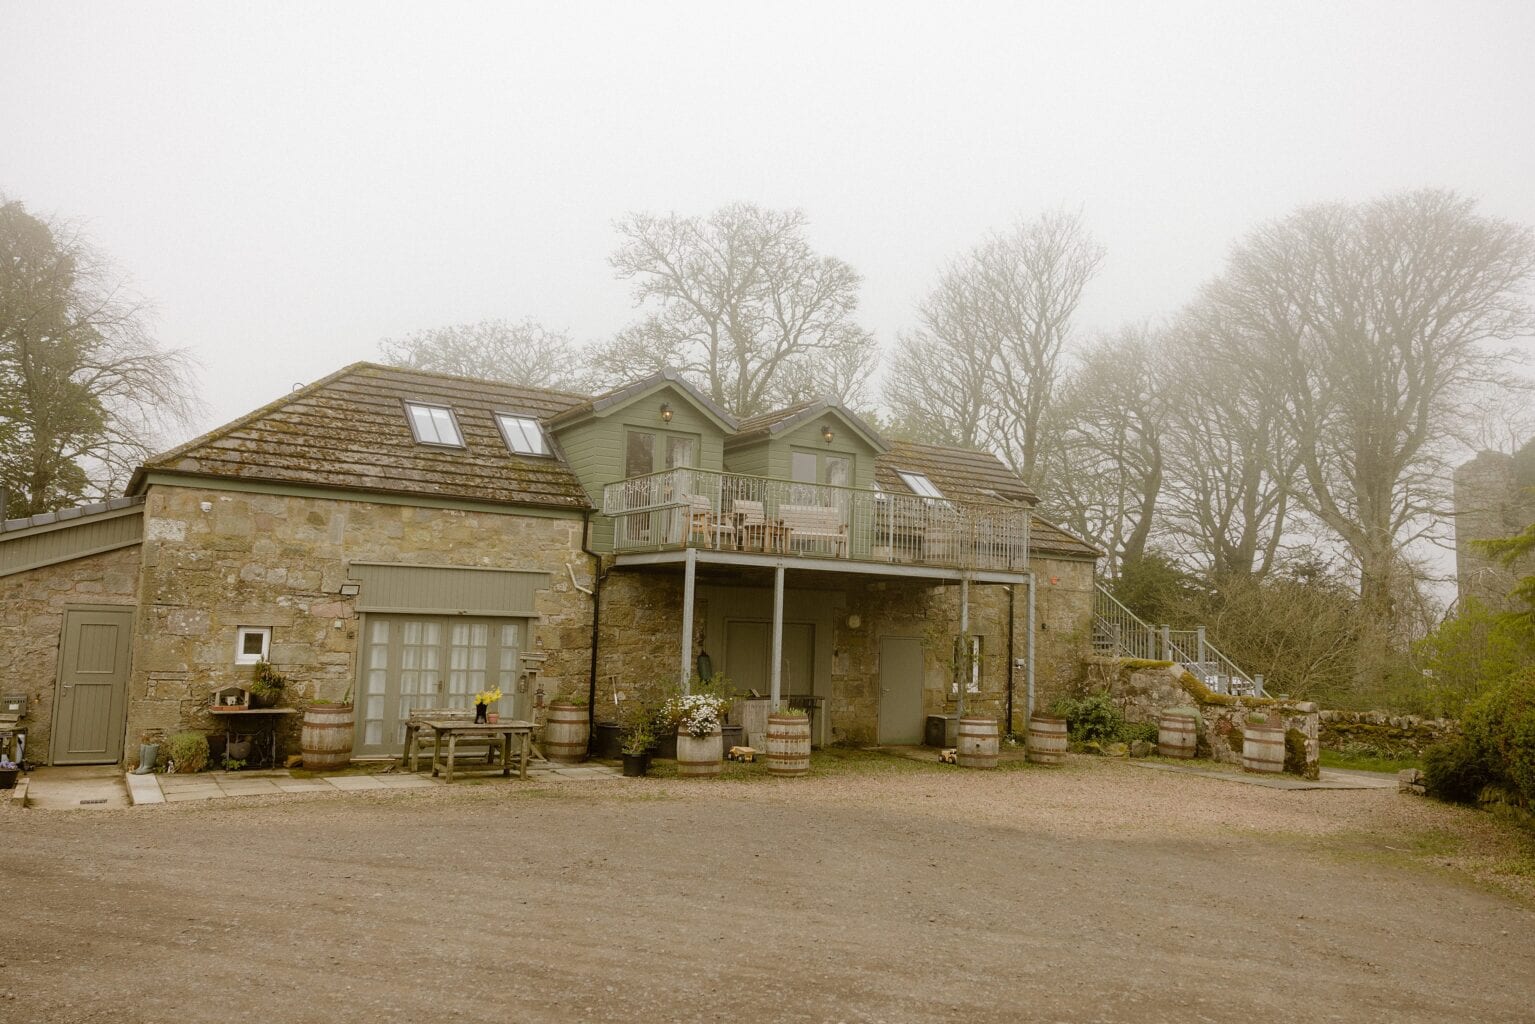 exterior outside view of a stone building barn wedding venues west lothian scotland on a foggy spring morning